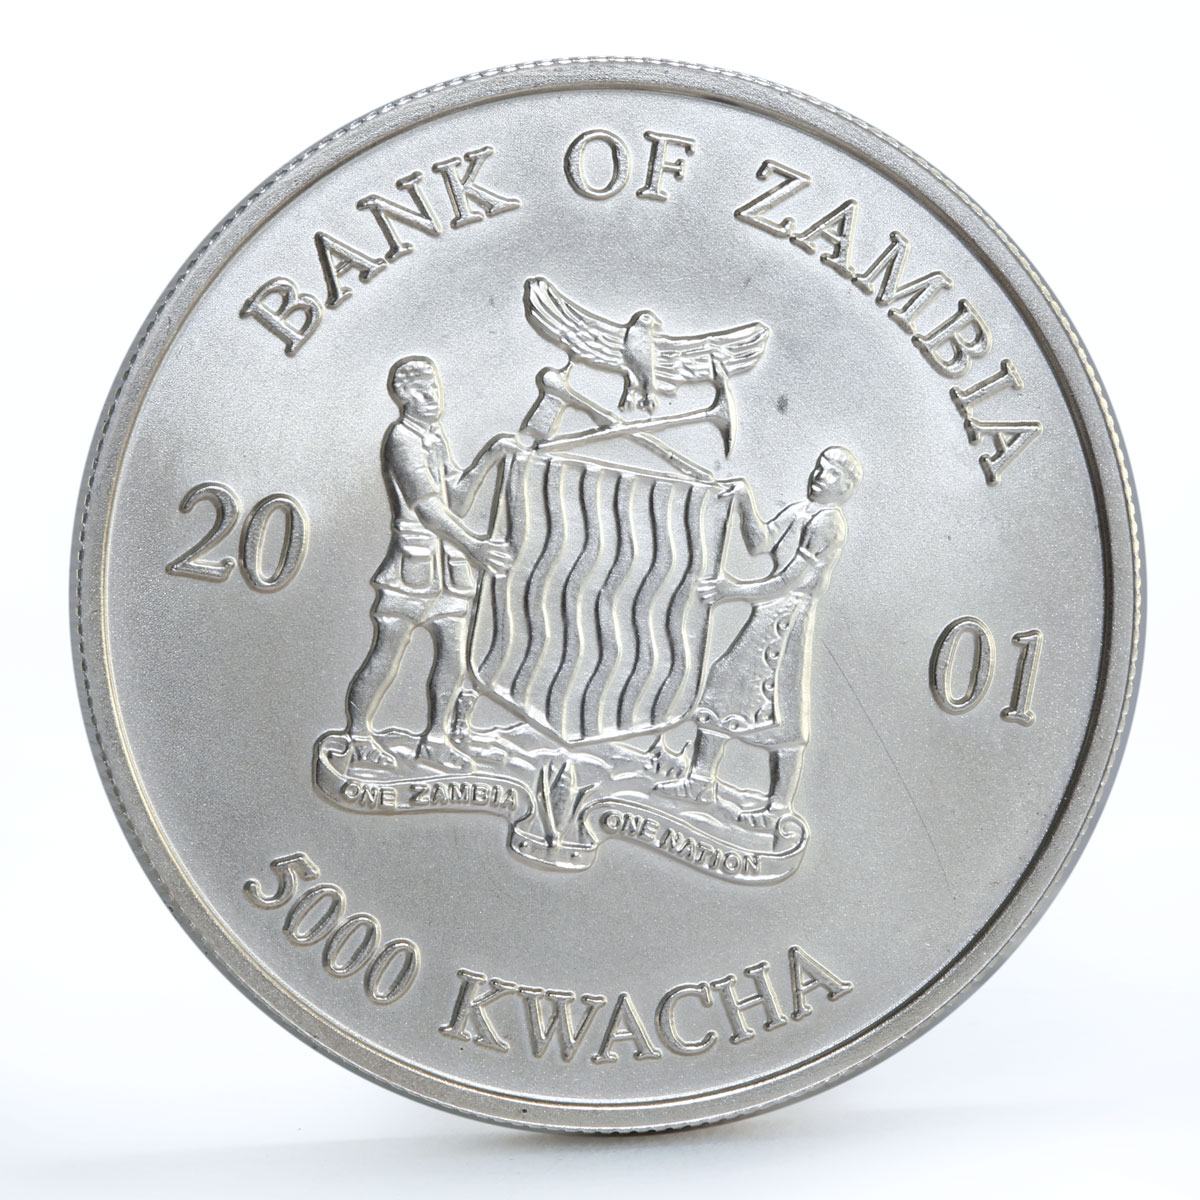 Zambia 5000 kwacha African Wildlife series Elephant silver coin 2001